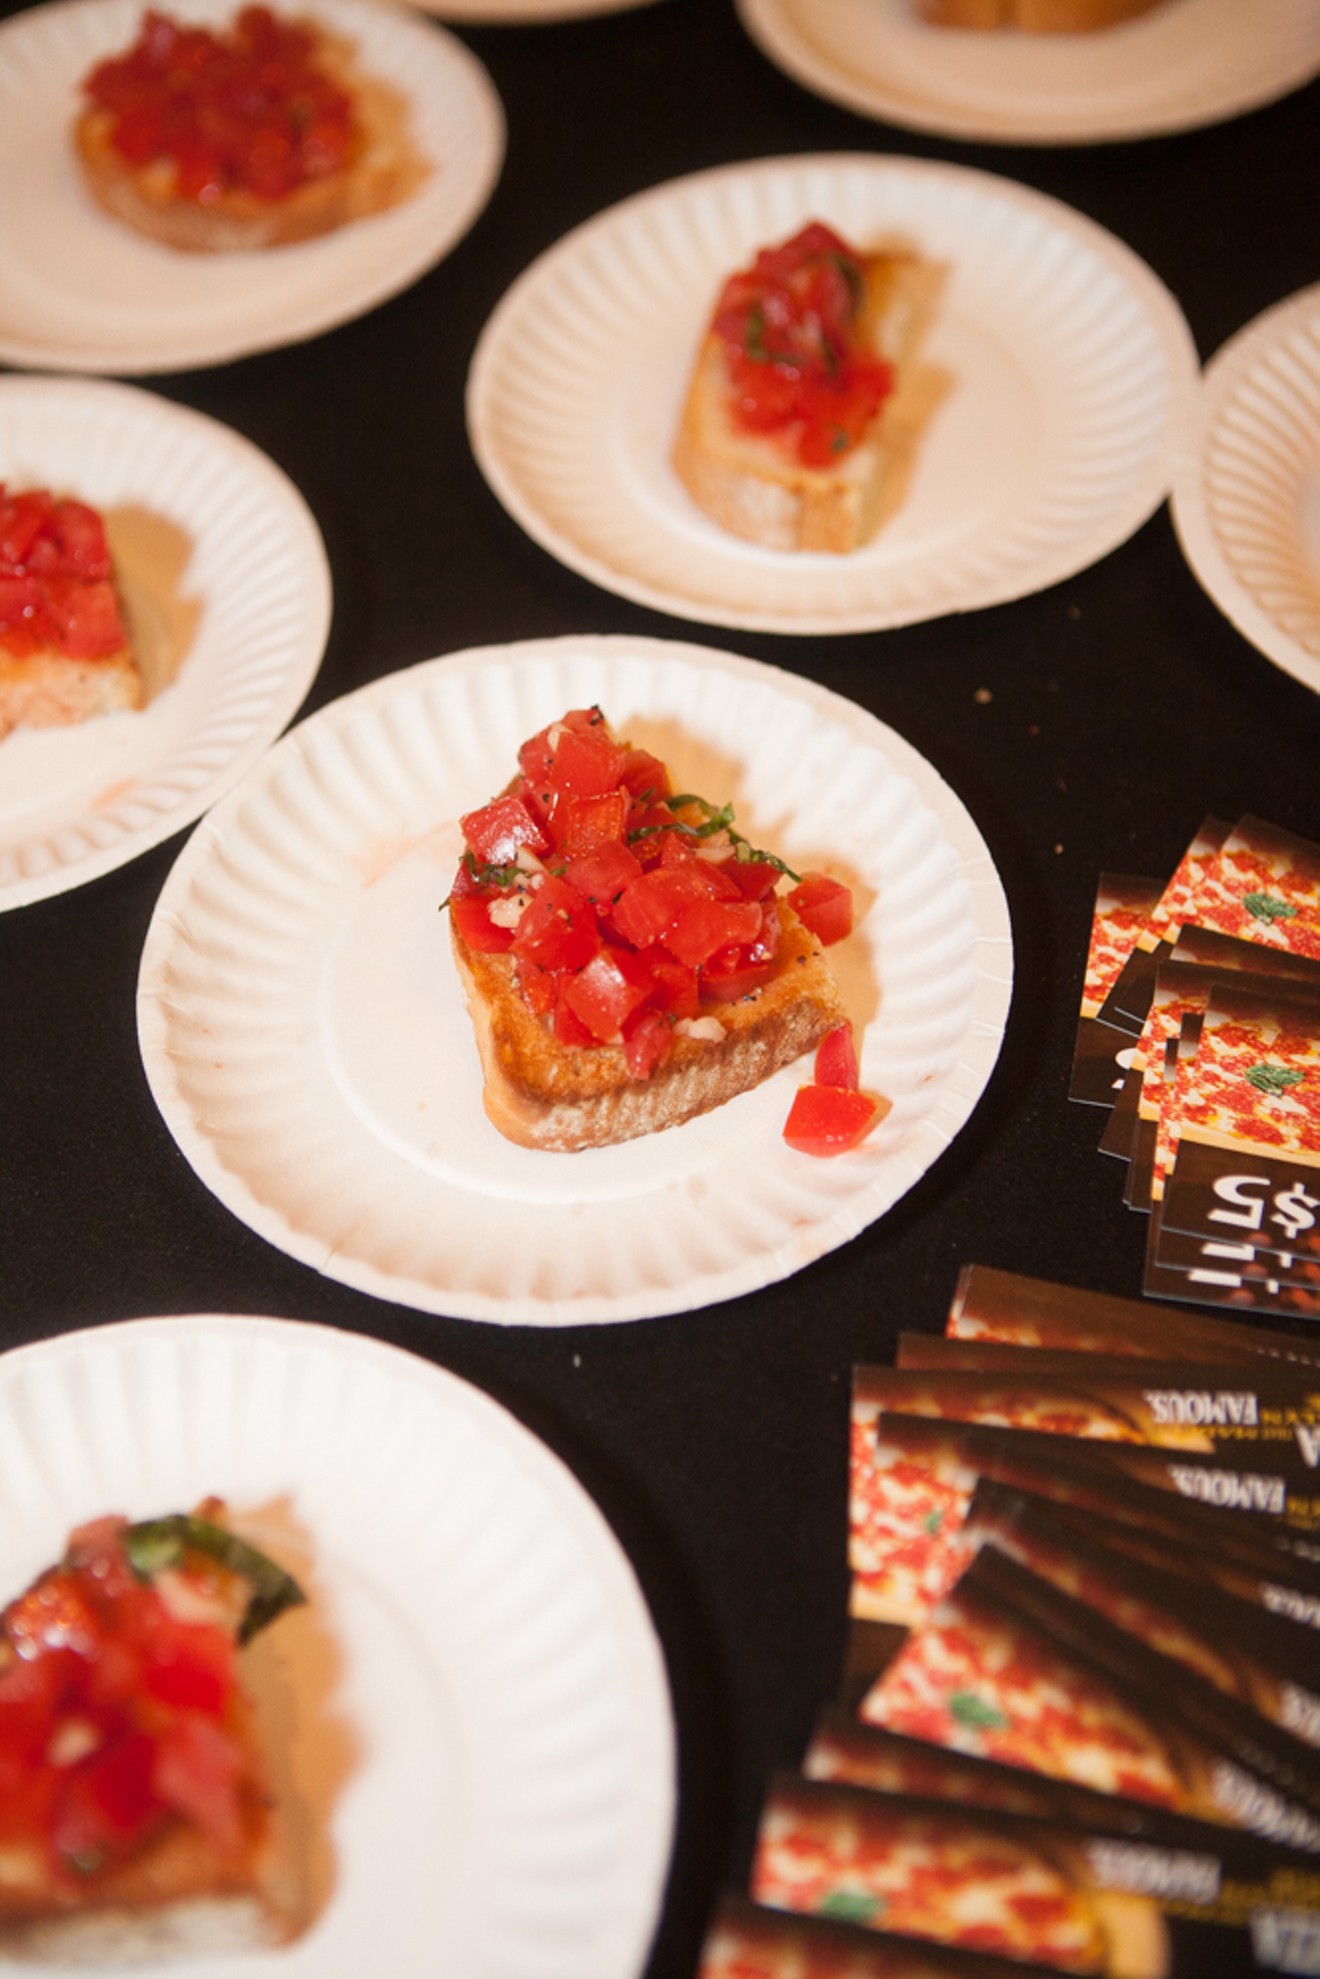 Grimaldi's Pizzeria offered samples at a recent Best of Phoenix A'Fare.